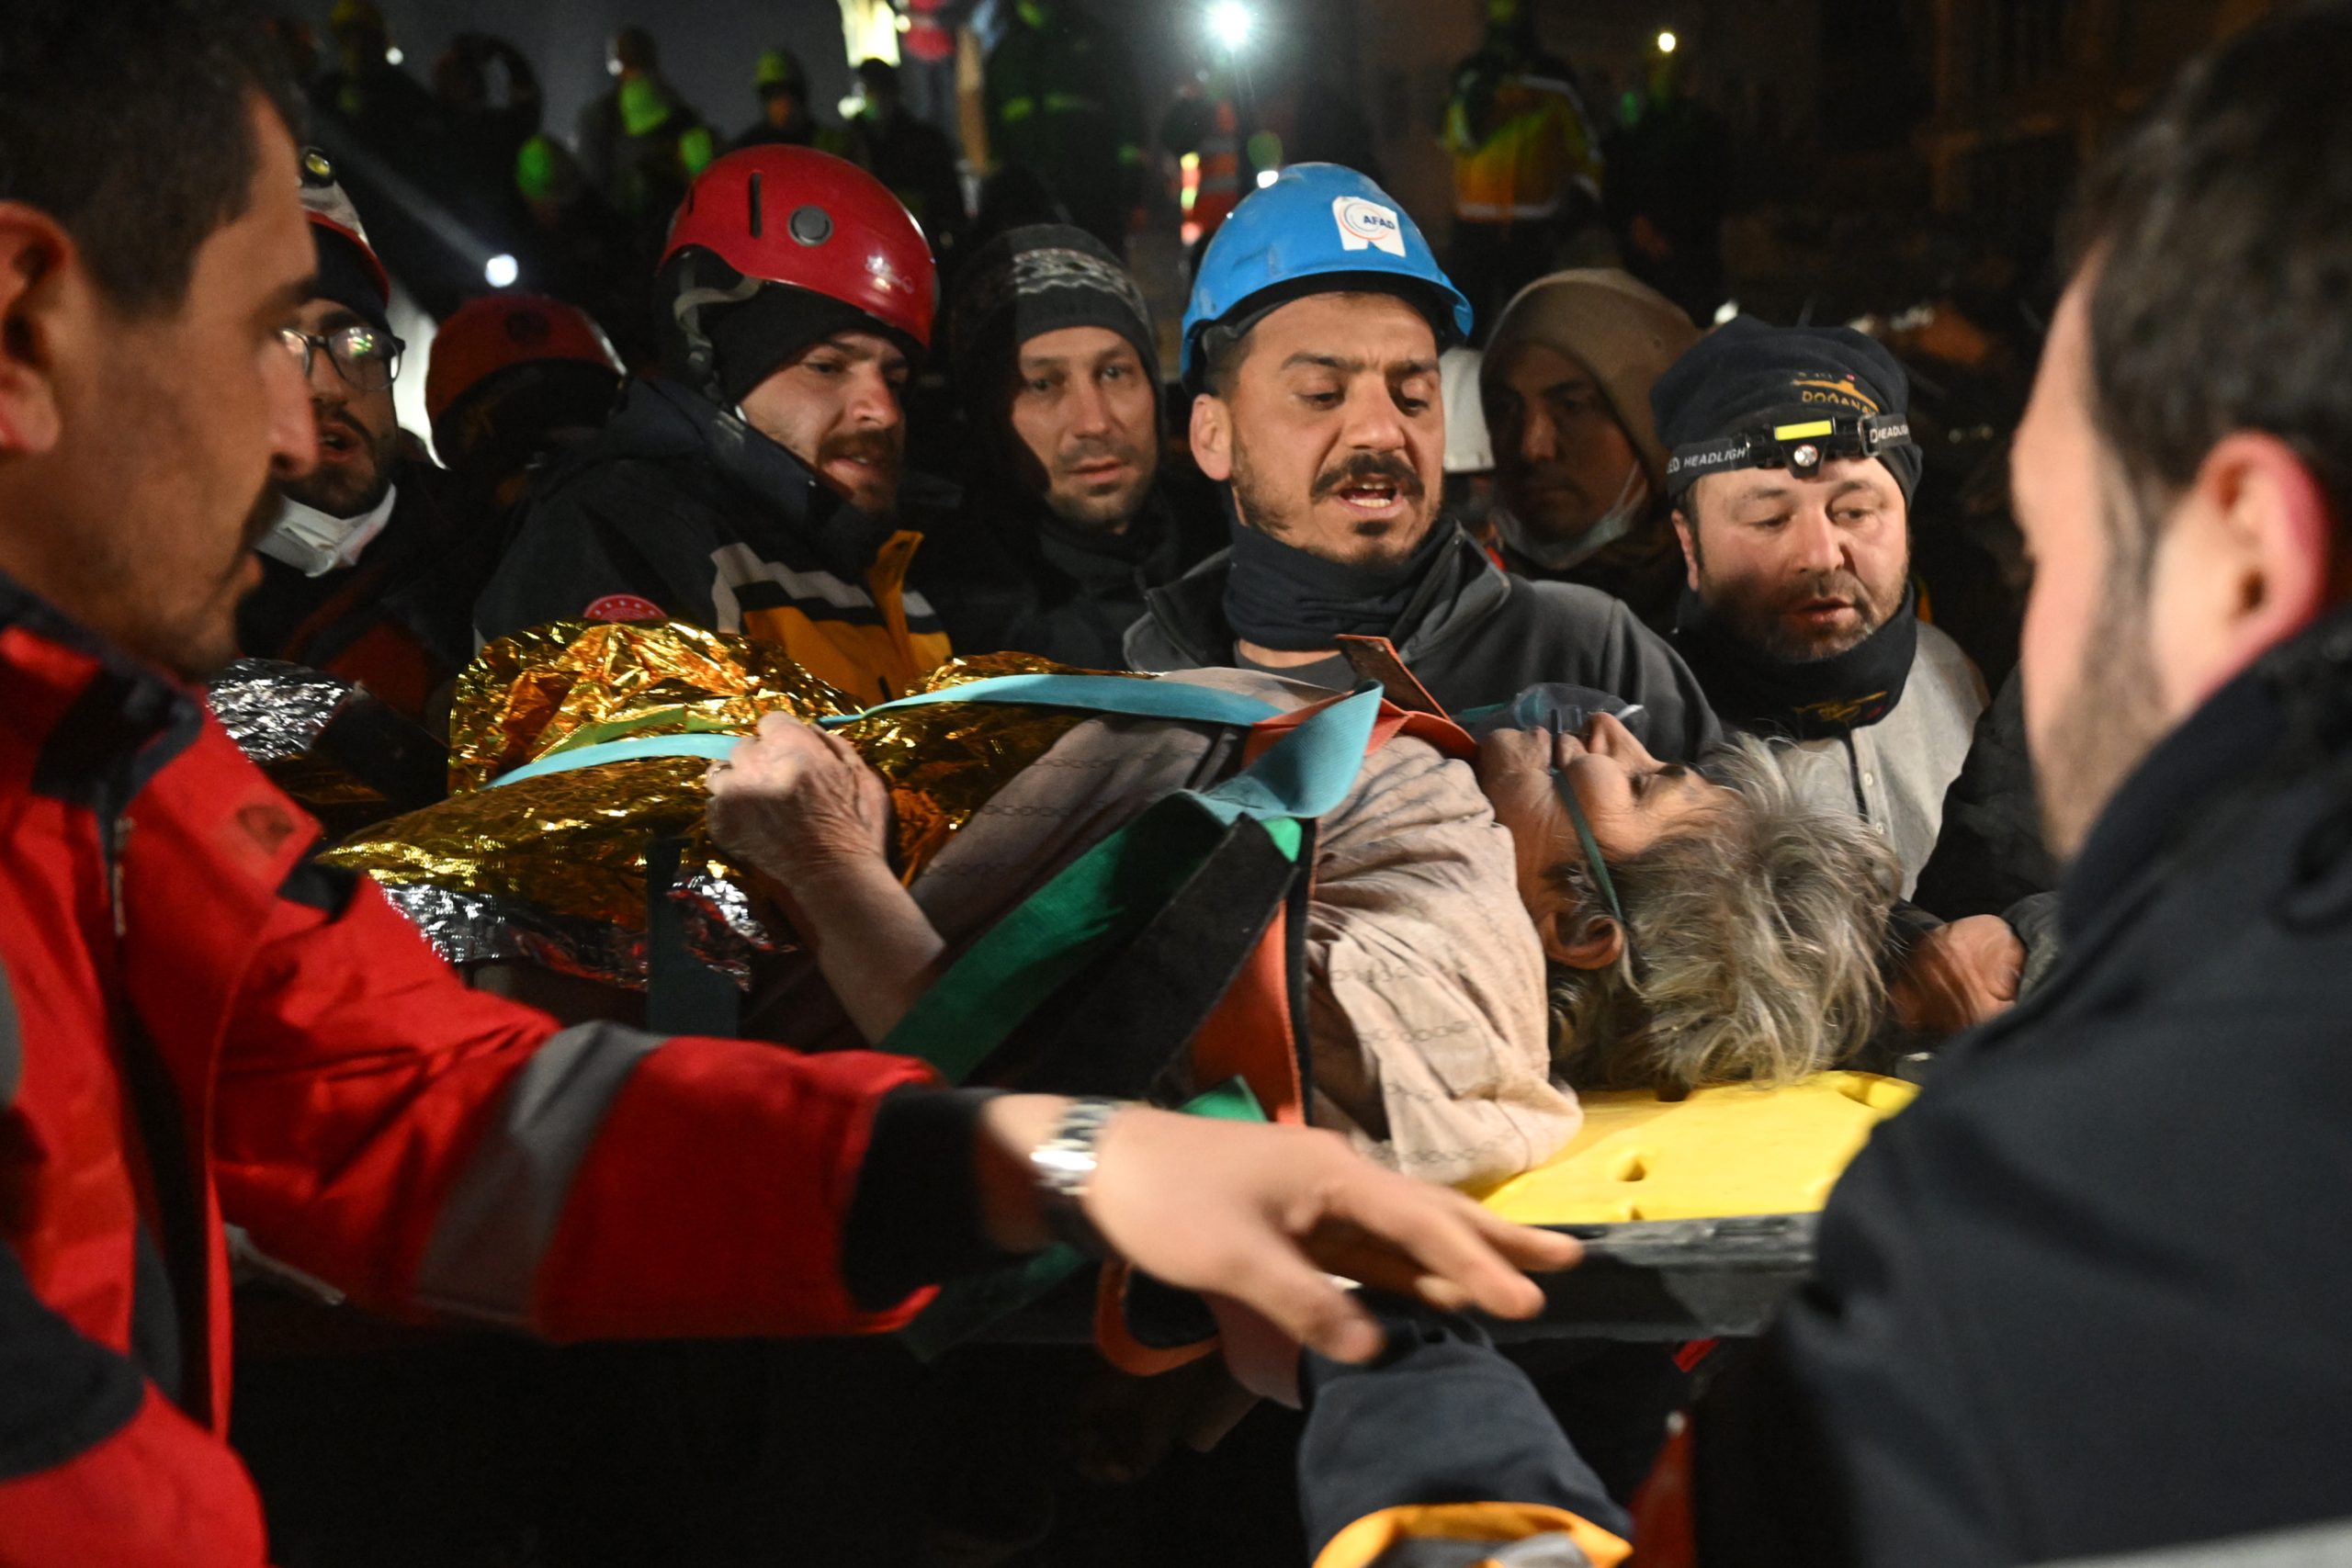 Woman rescued 212 hours after earthquakes in Turkiye